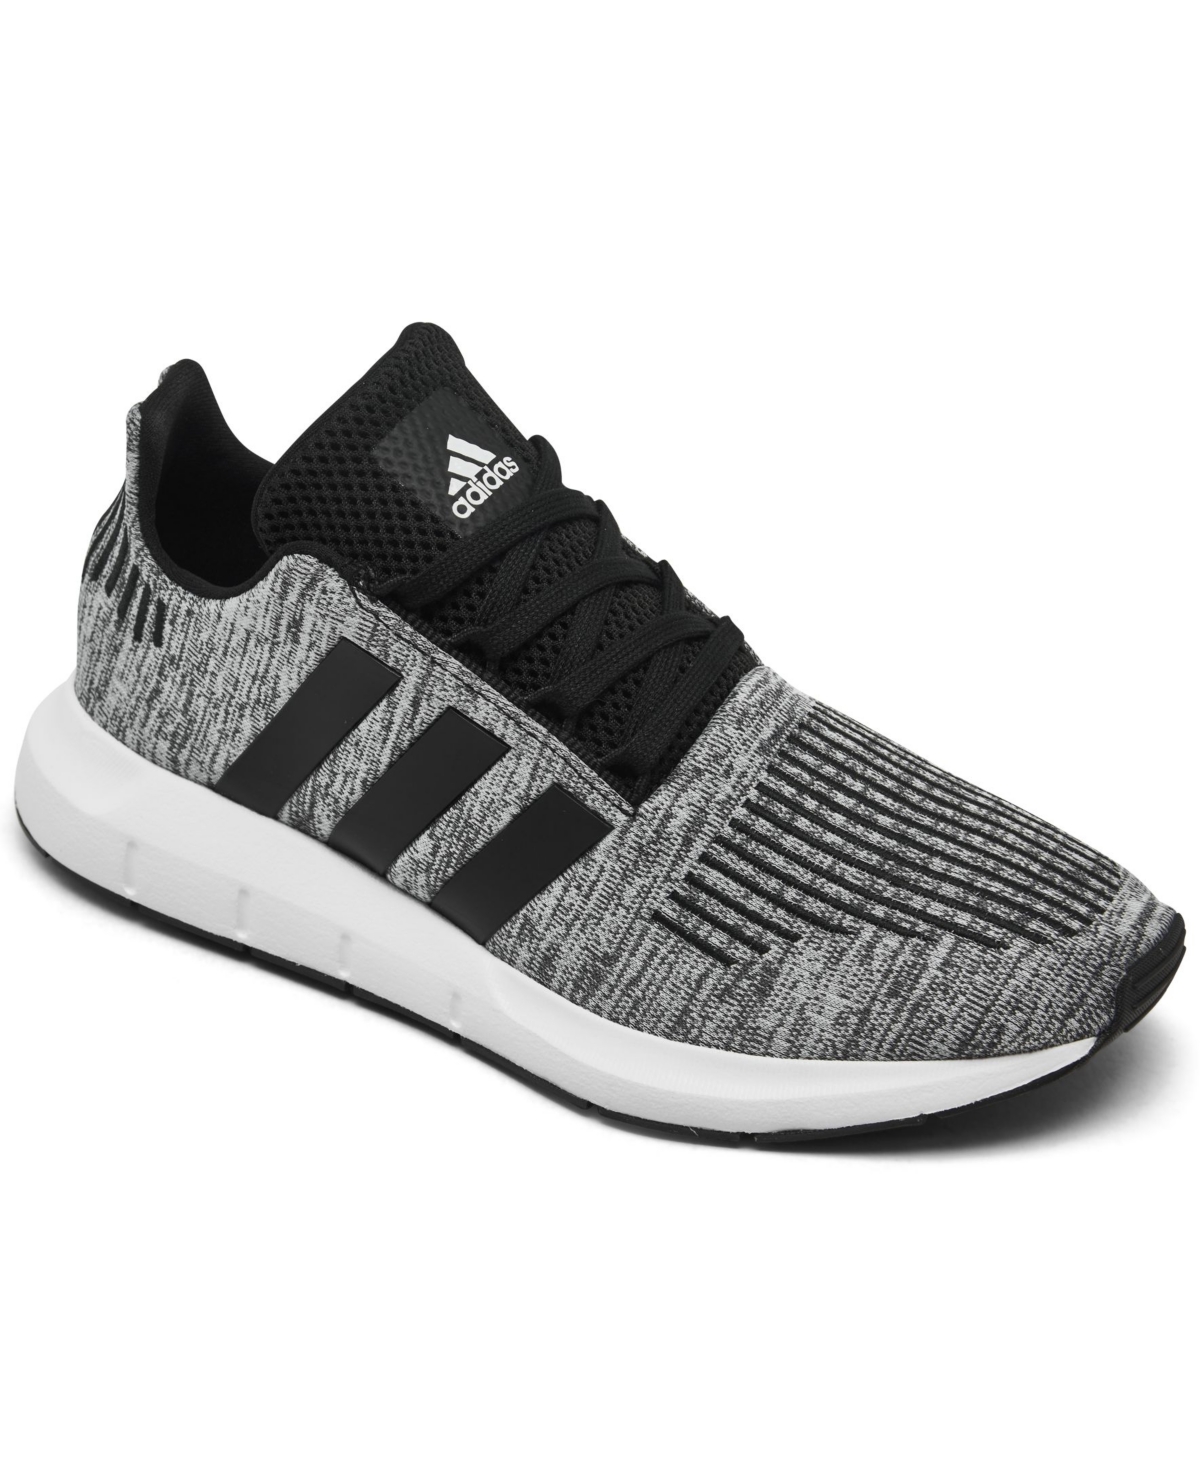 Adidas Originals Big Kids Swift Run 1.0 Casual Sneakers From Finish Line In Black,white